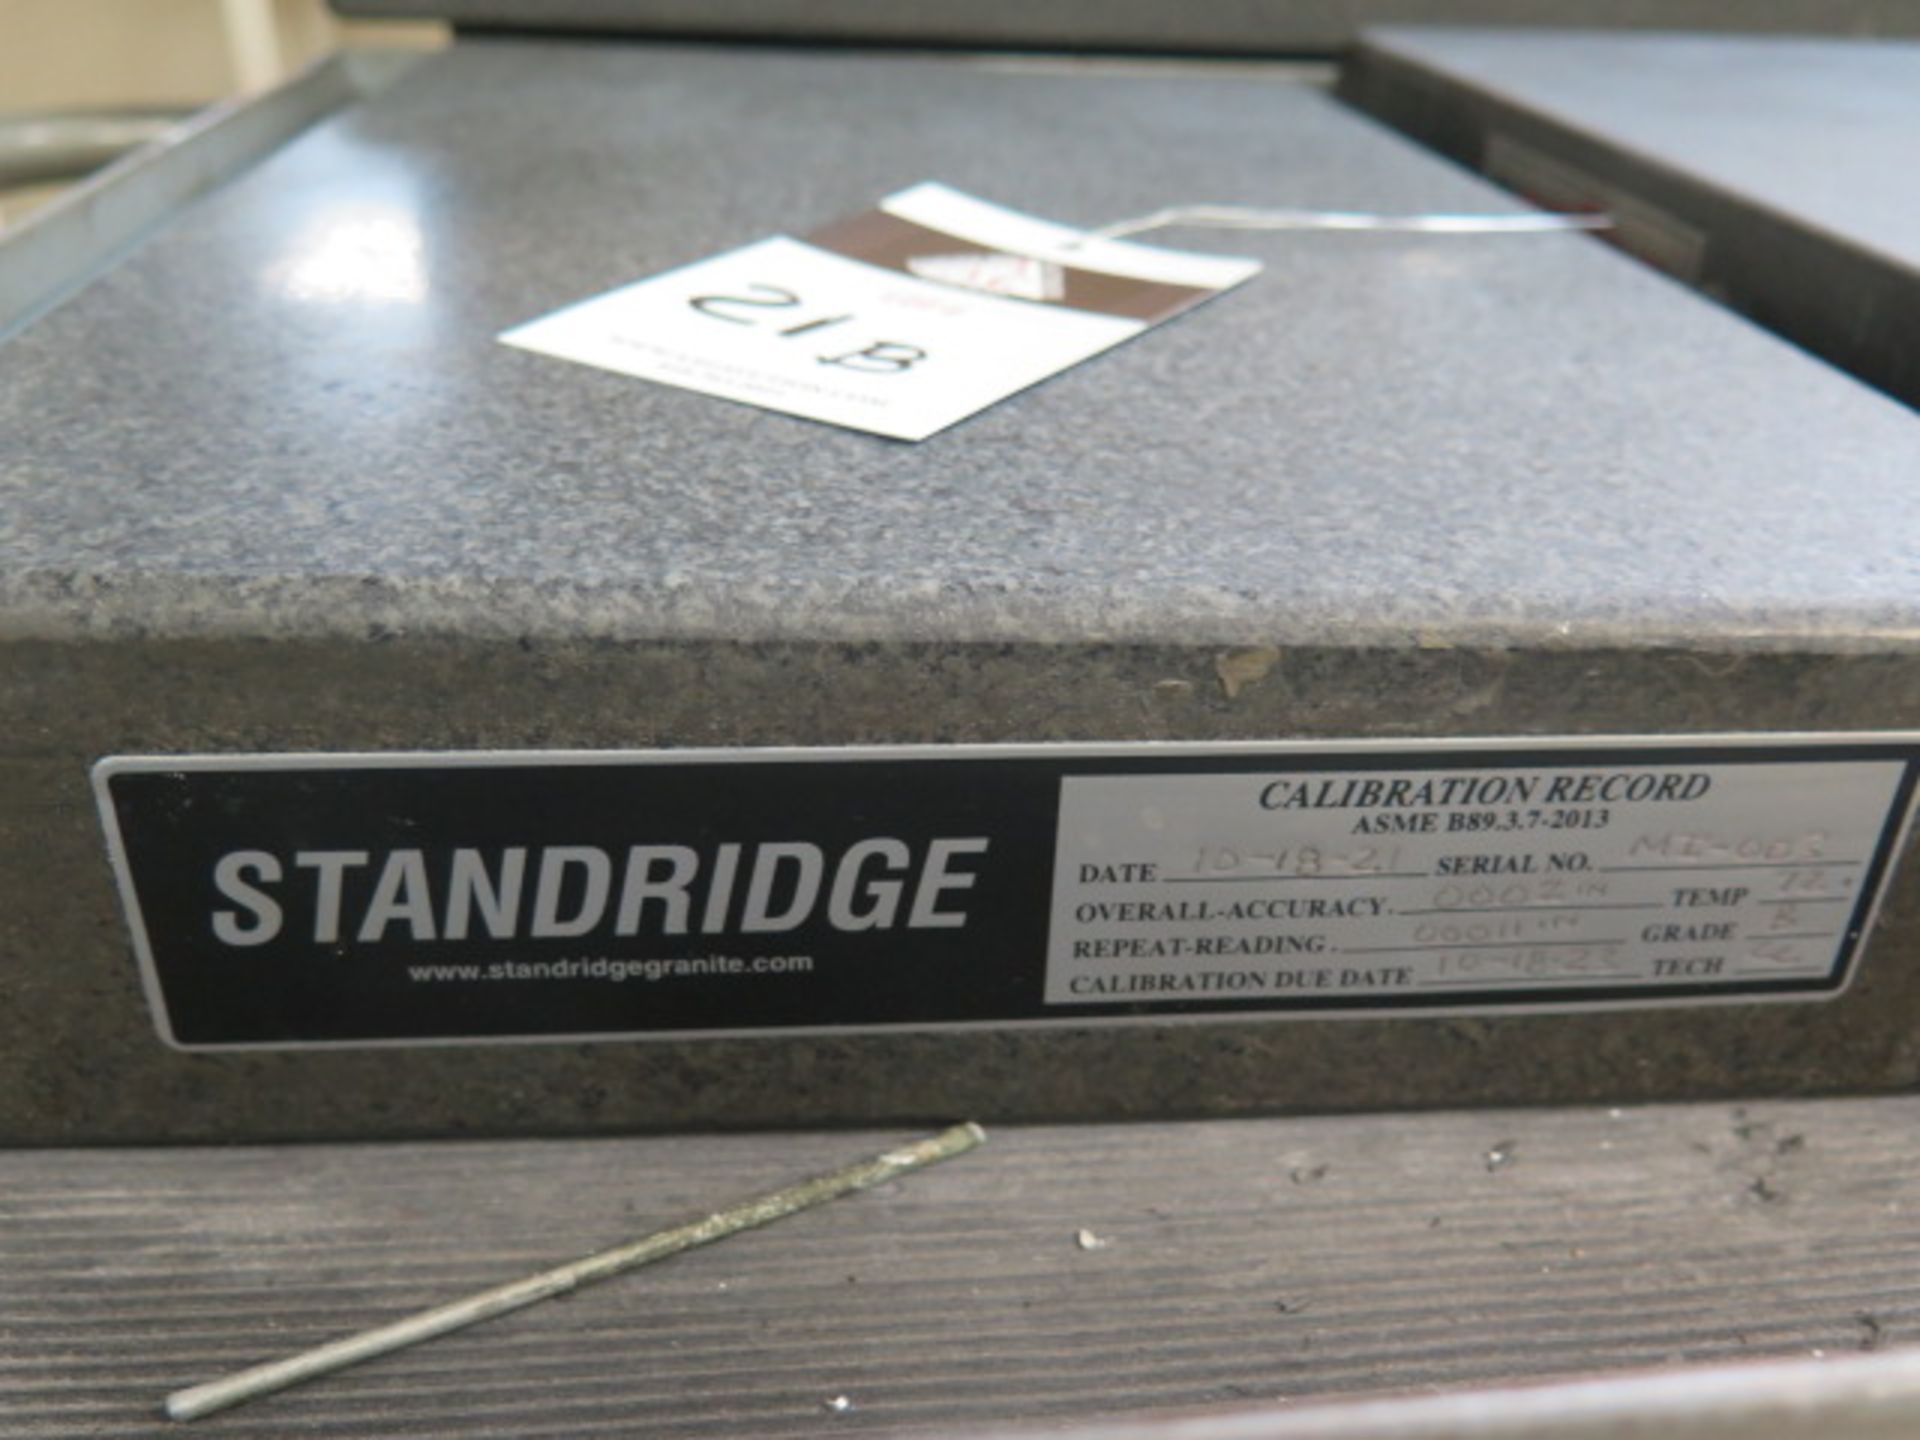 Standridge 12" x 18" x 3" Granite Surface Plate (SOLD AS-IS - NO WARRANTY) - Image 5 of 5